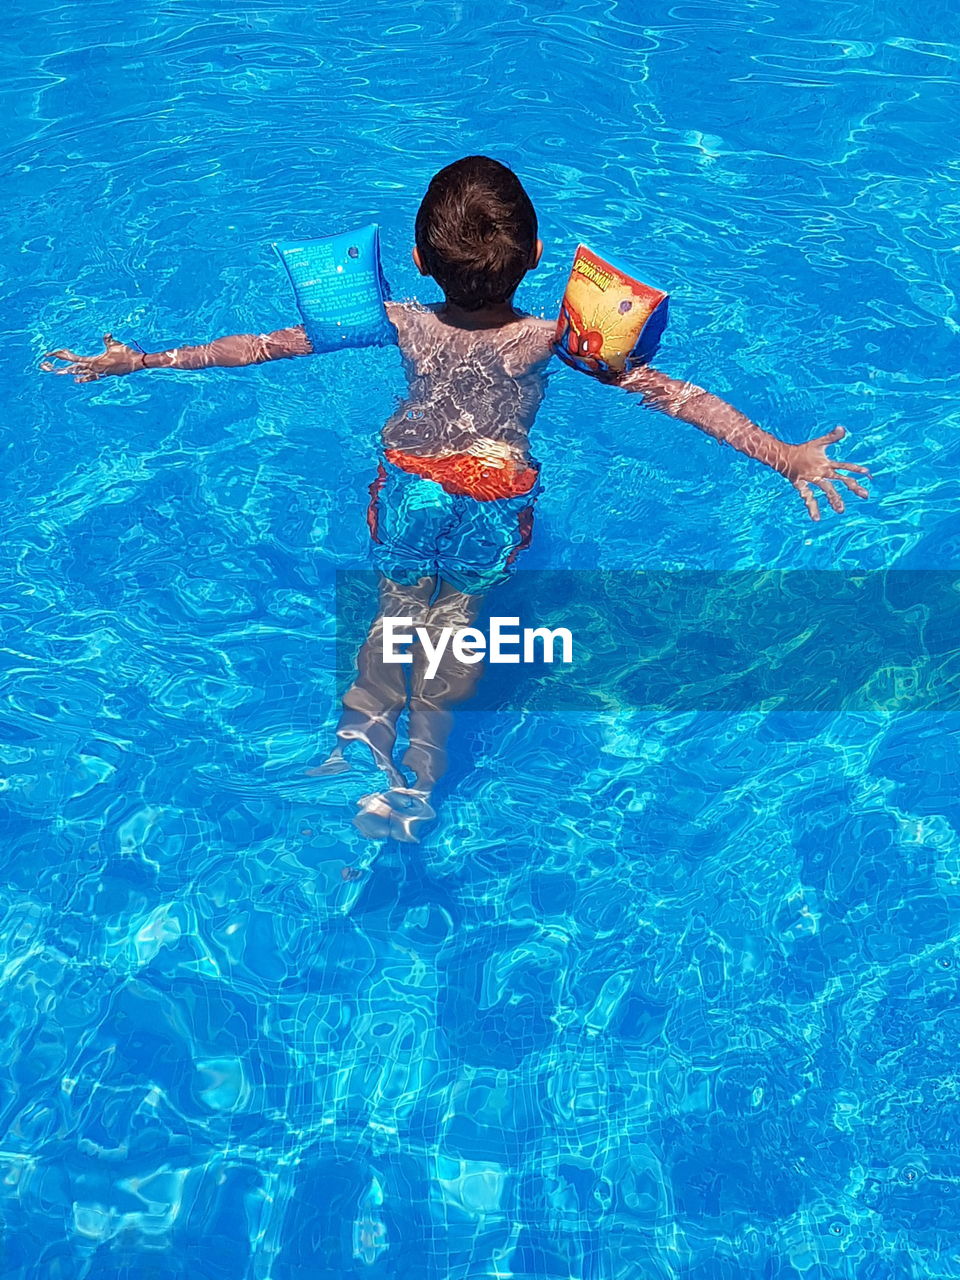 HIGH ANGLE VIEW OF BOY ON SWIMMING POOL